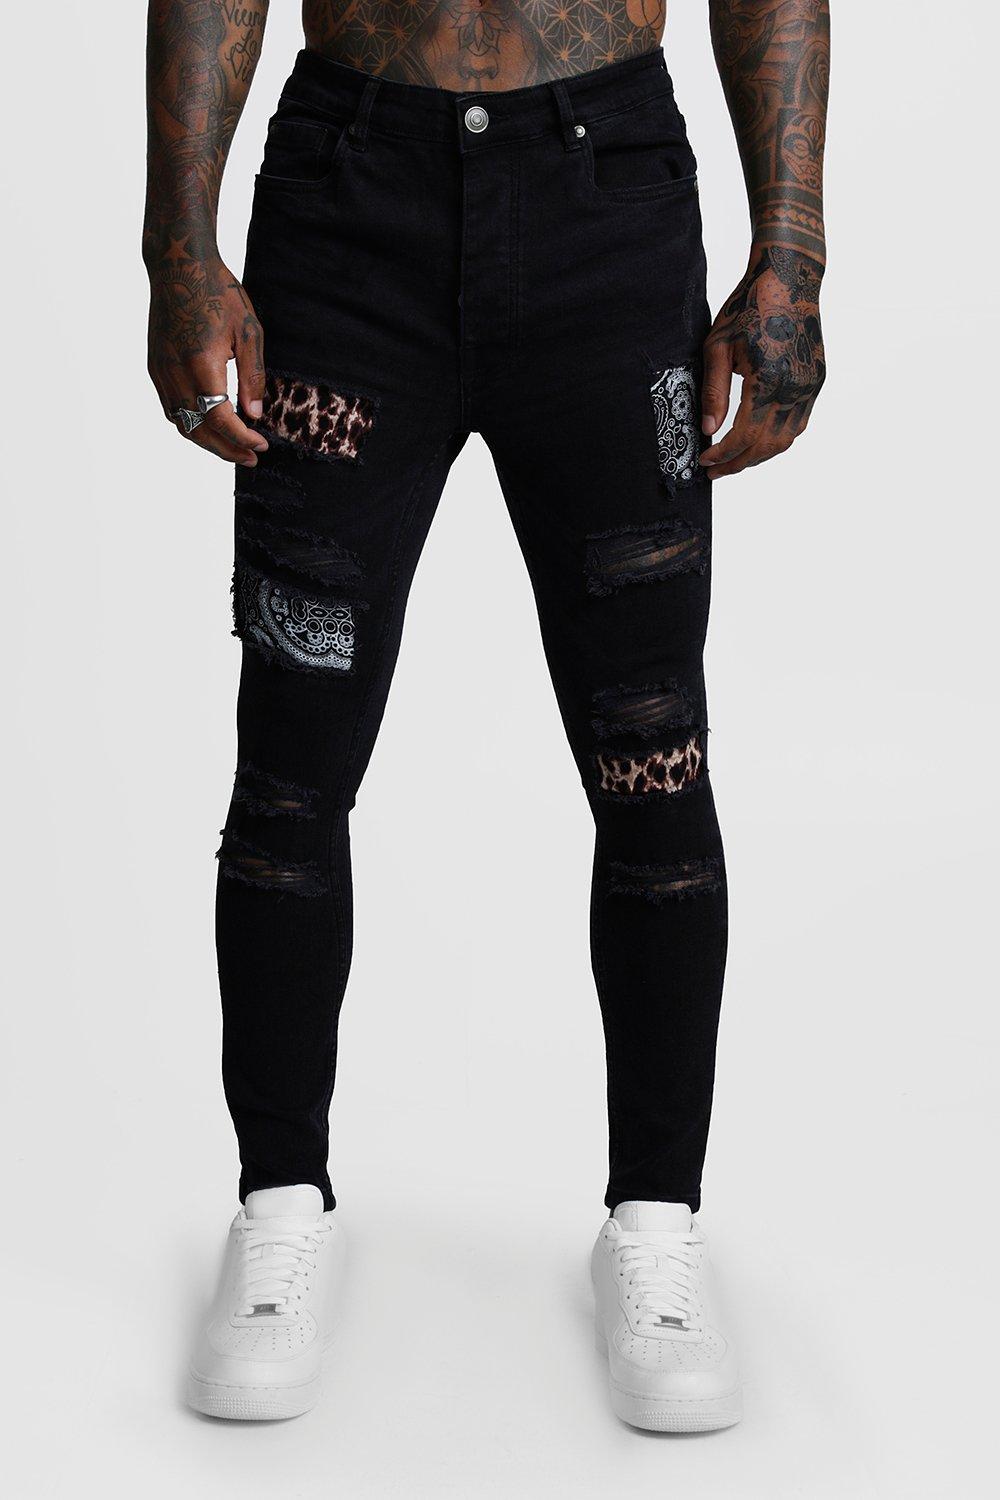 patched black jeans